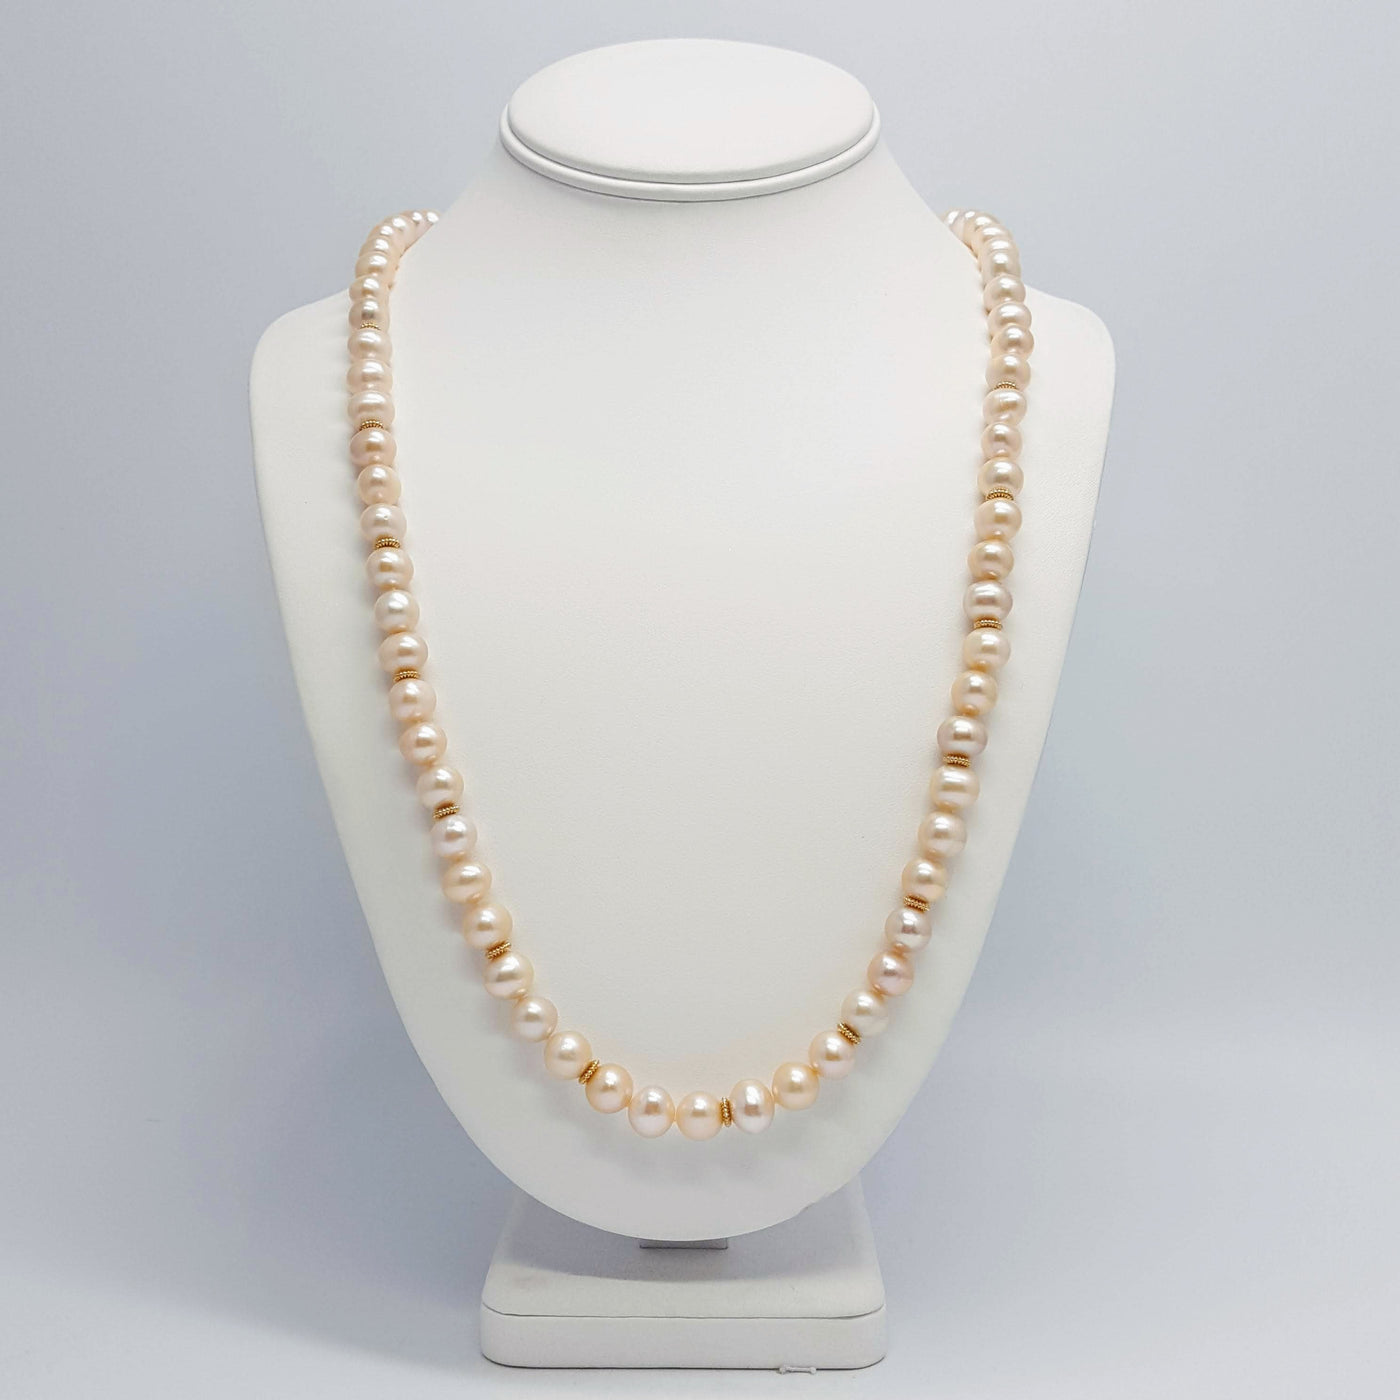 "Pink Lady" Necklace - Lustrous Pink Pearl with Gold Accents